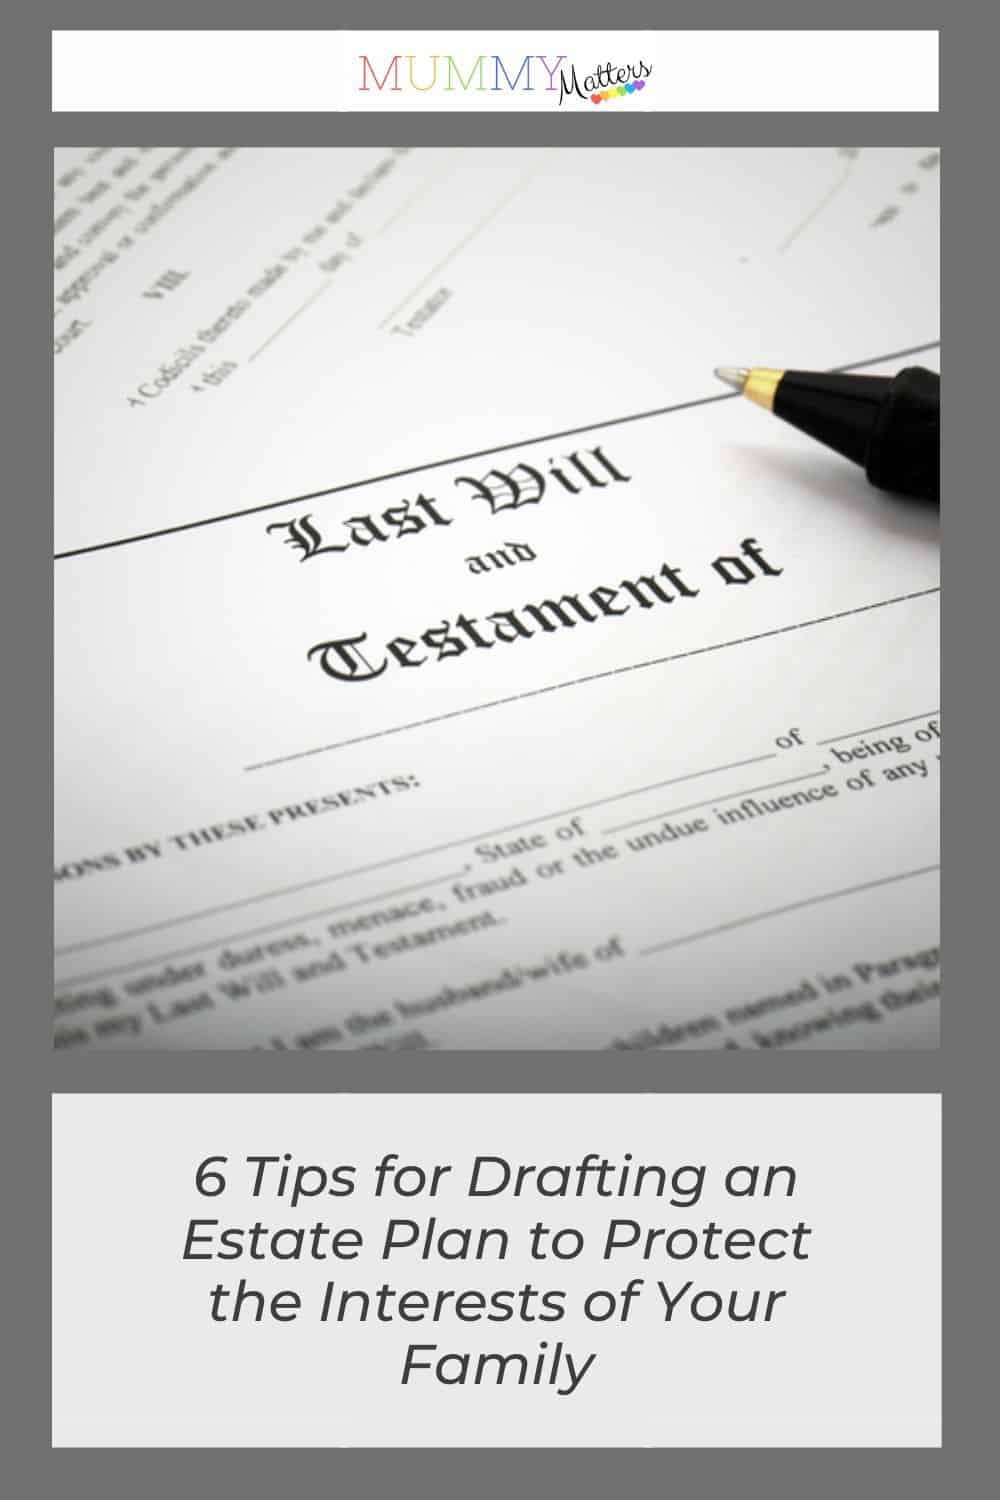 Drafting an estate plan allows you to provide for your surviving spouse and children, and is necessary for preserving the family wealth. This post will guide you through 6 things to be mindful of when drafting yours.